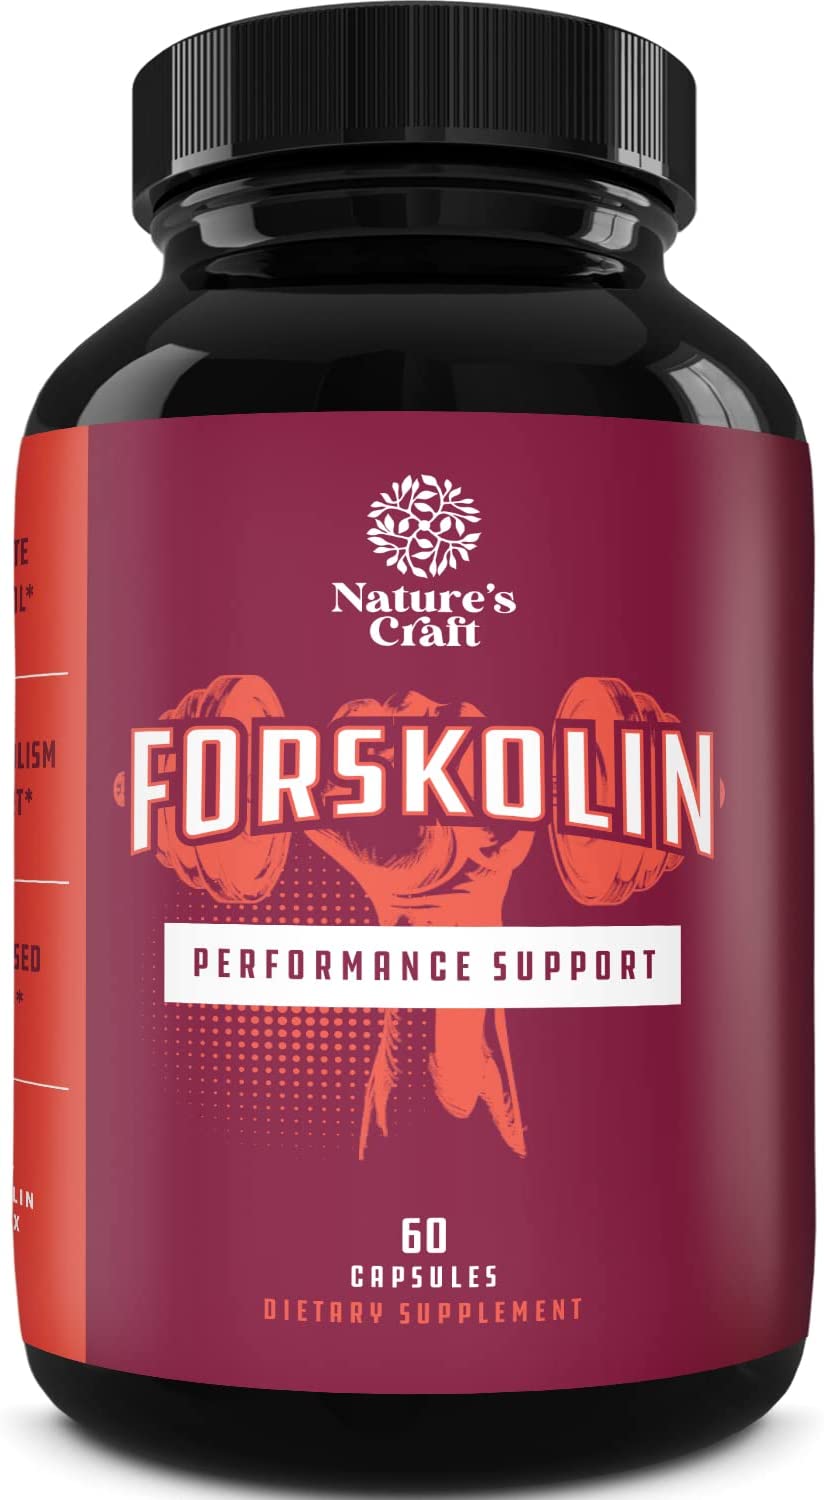 Max Strength Forskolin 60 Veggie Capsules Weight Loss Supplement for Men and Women - Fast Acting Diet Pills Natural Appetite Suppressant Potent Fat Burner Builds Muscle Boosts Energy